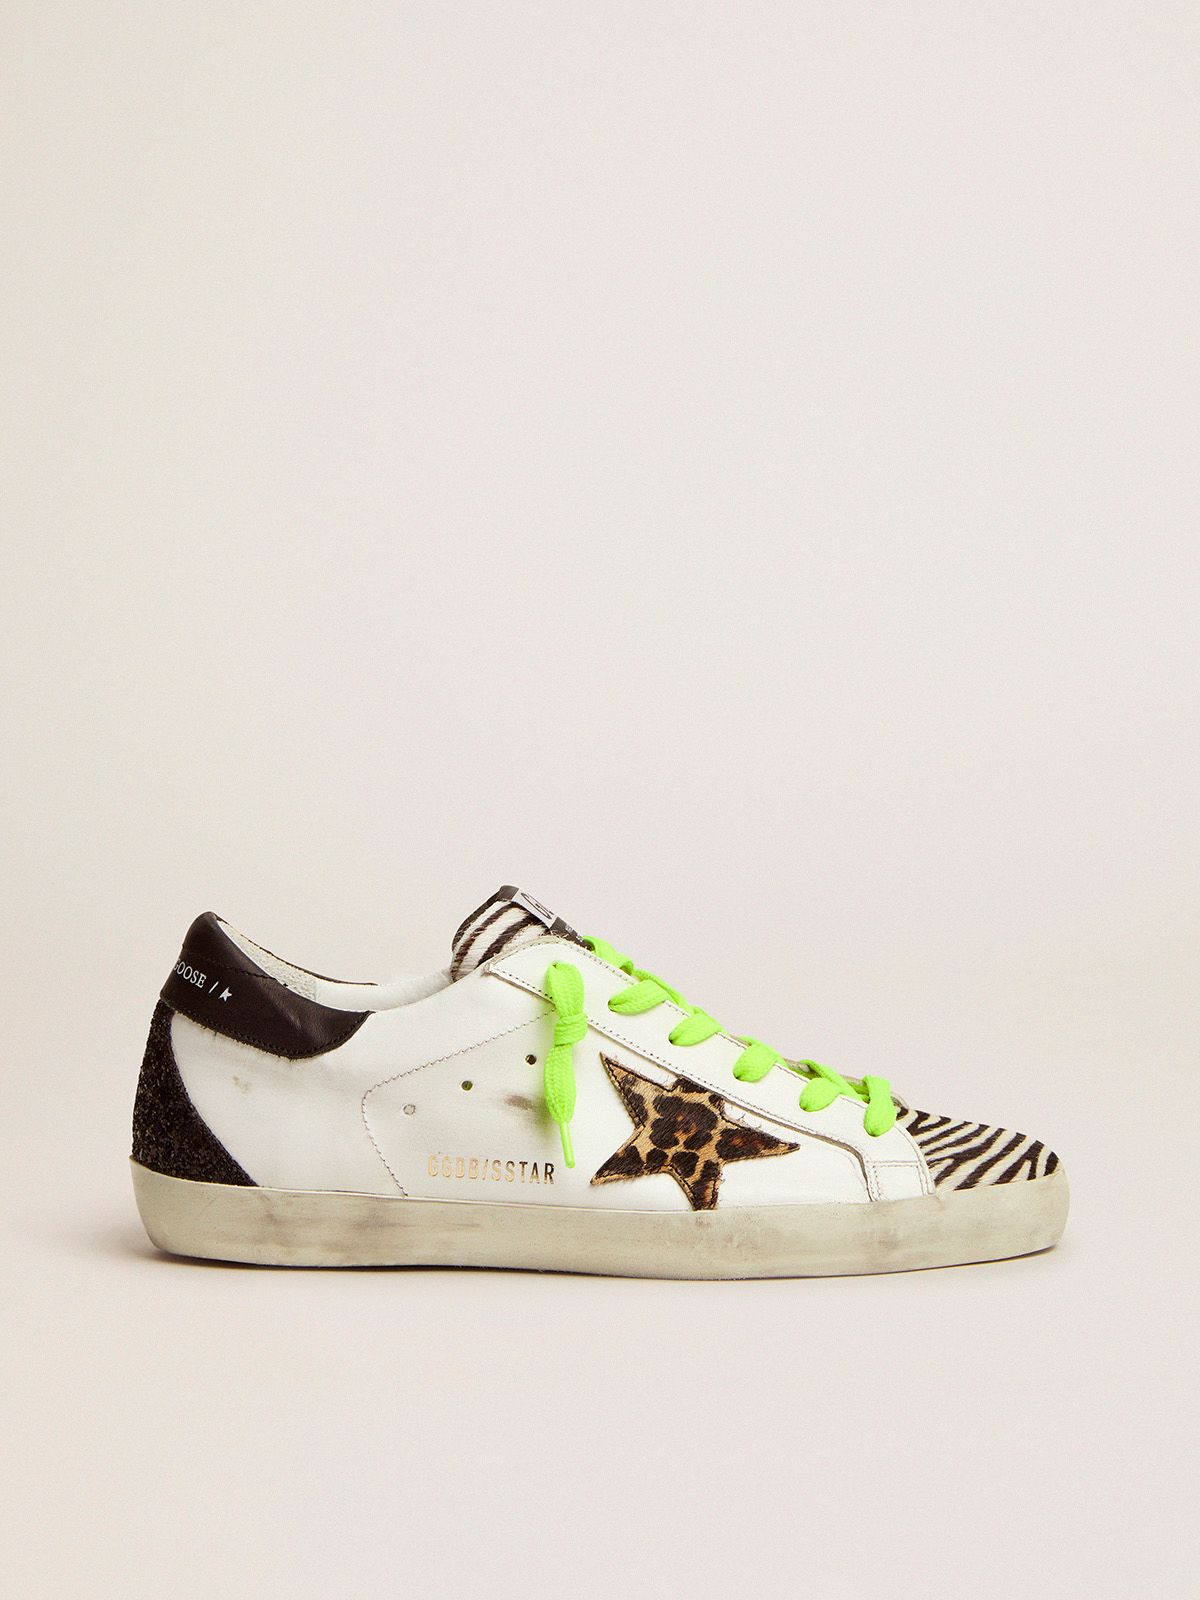 Super-Star LTD sneakers with animal-print pony skin tongue and star